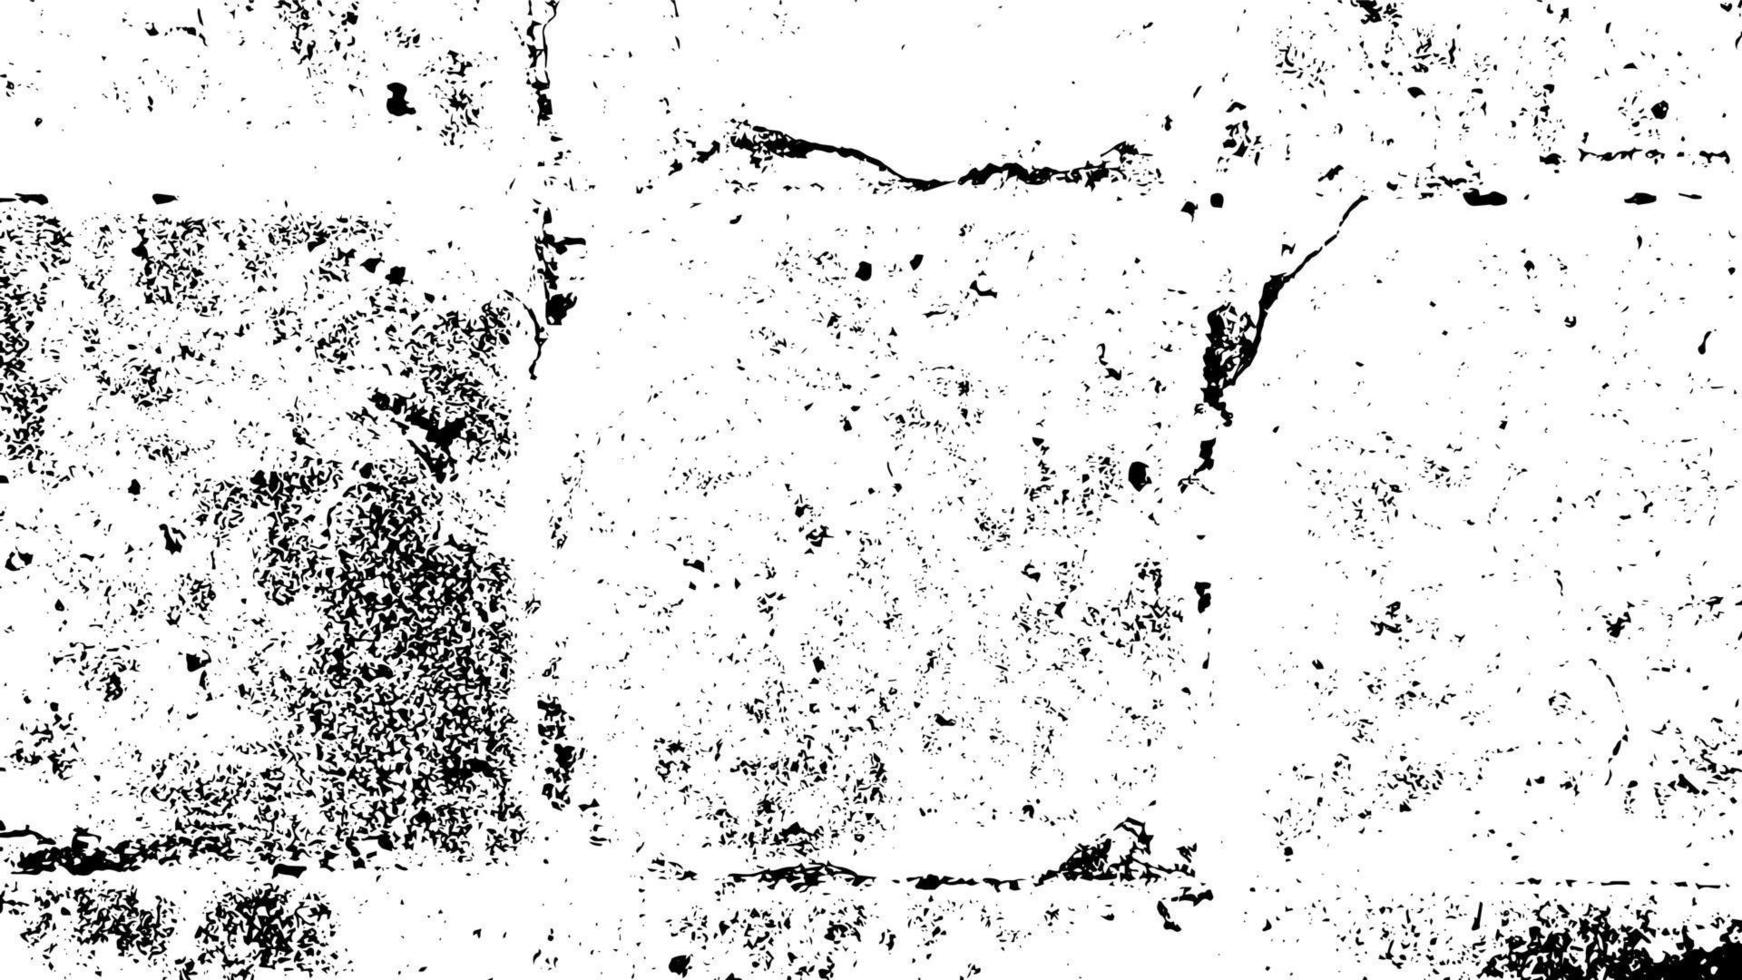 Rustic grunge vector texture with grain and stains. Abstract noise background. Weathered surface. Dirty and damaged.